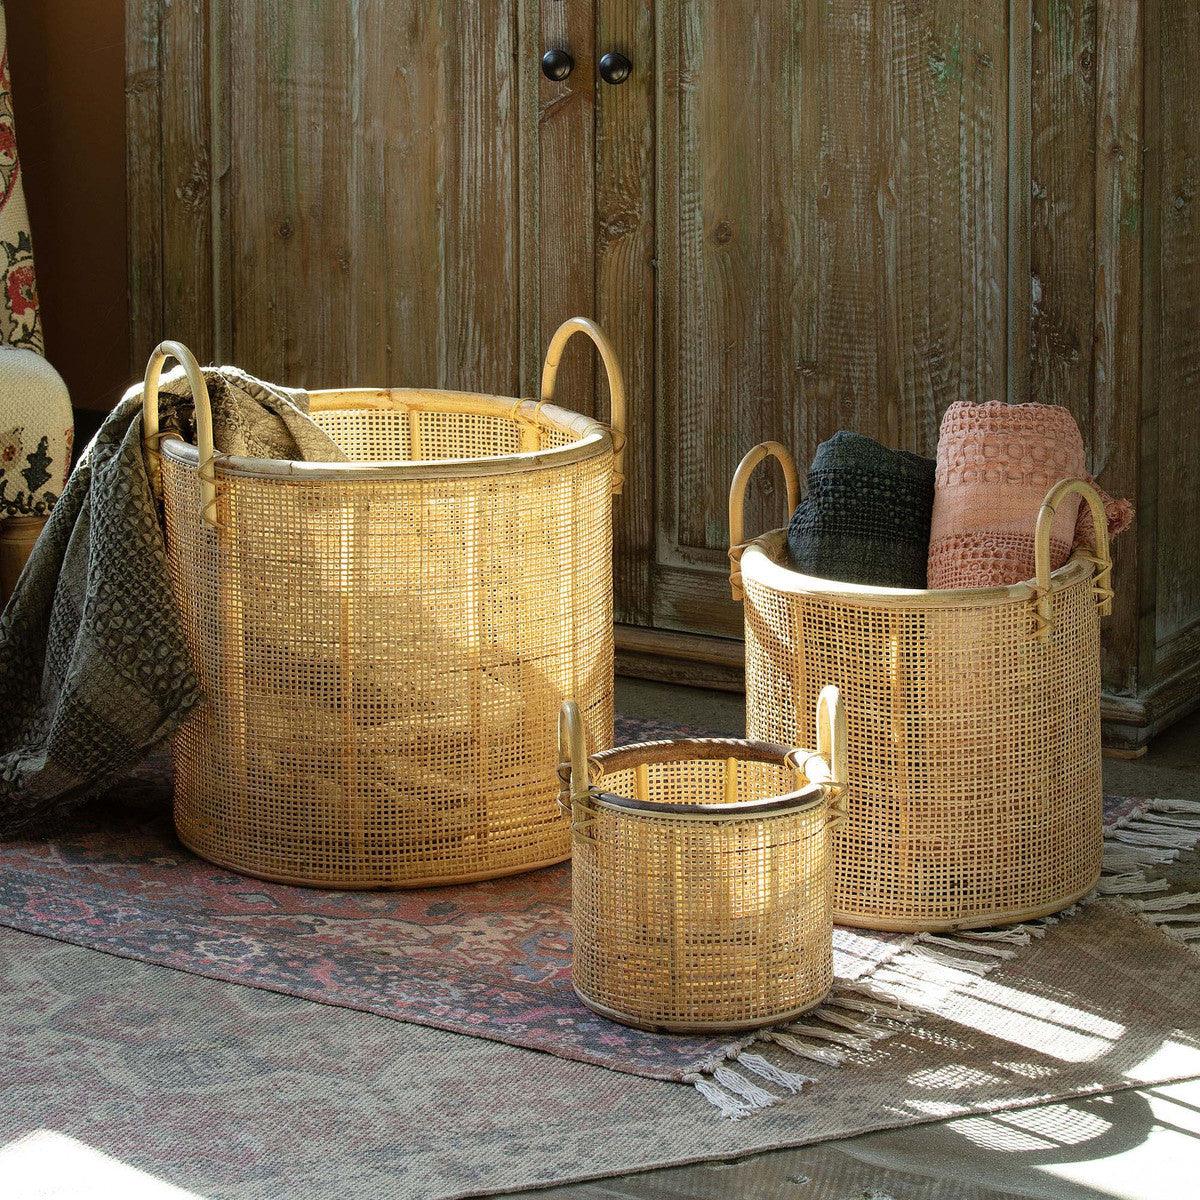 Woven Rattan Baskets with Handles, Set of 3 - Signastyle Boutique